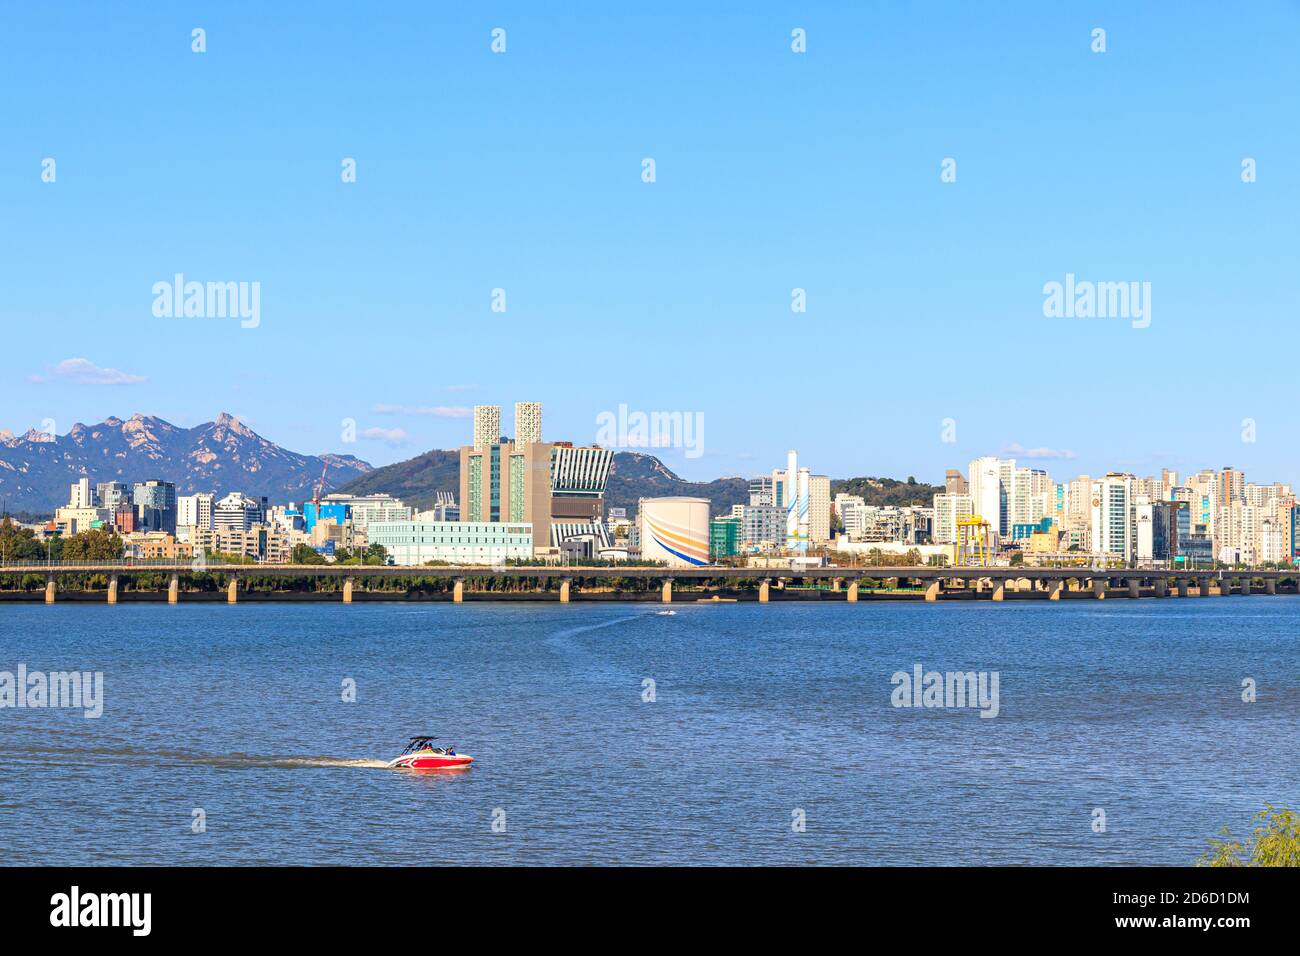 Seoul, South Korea - October 8, 2020. Seoul Han River scenery. The scenery of the north riverside road of the Han River in Seoul. Stock Photo